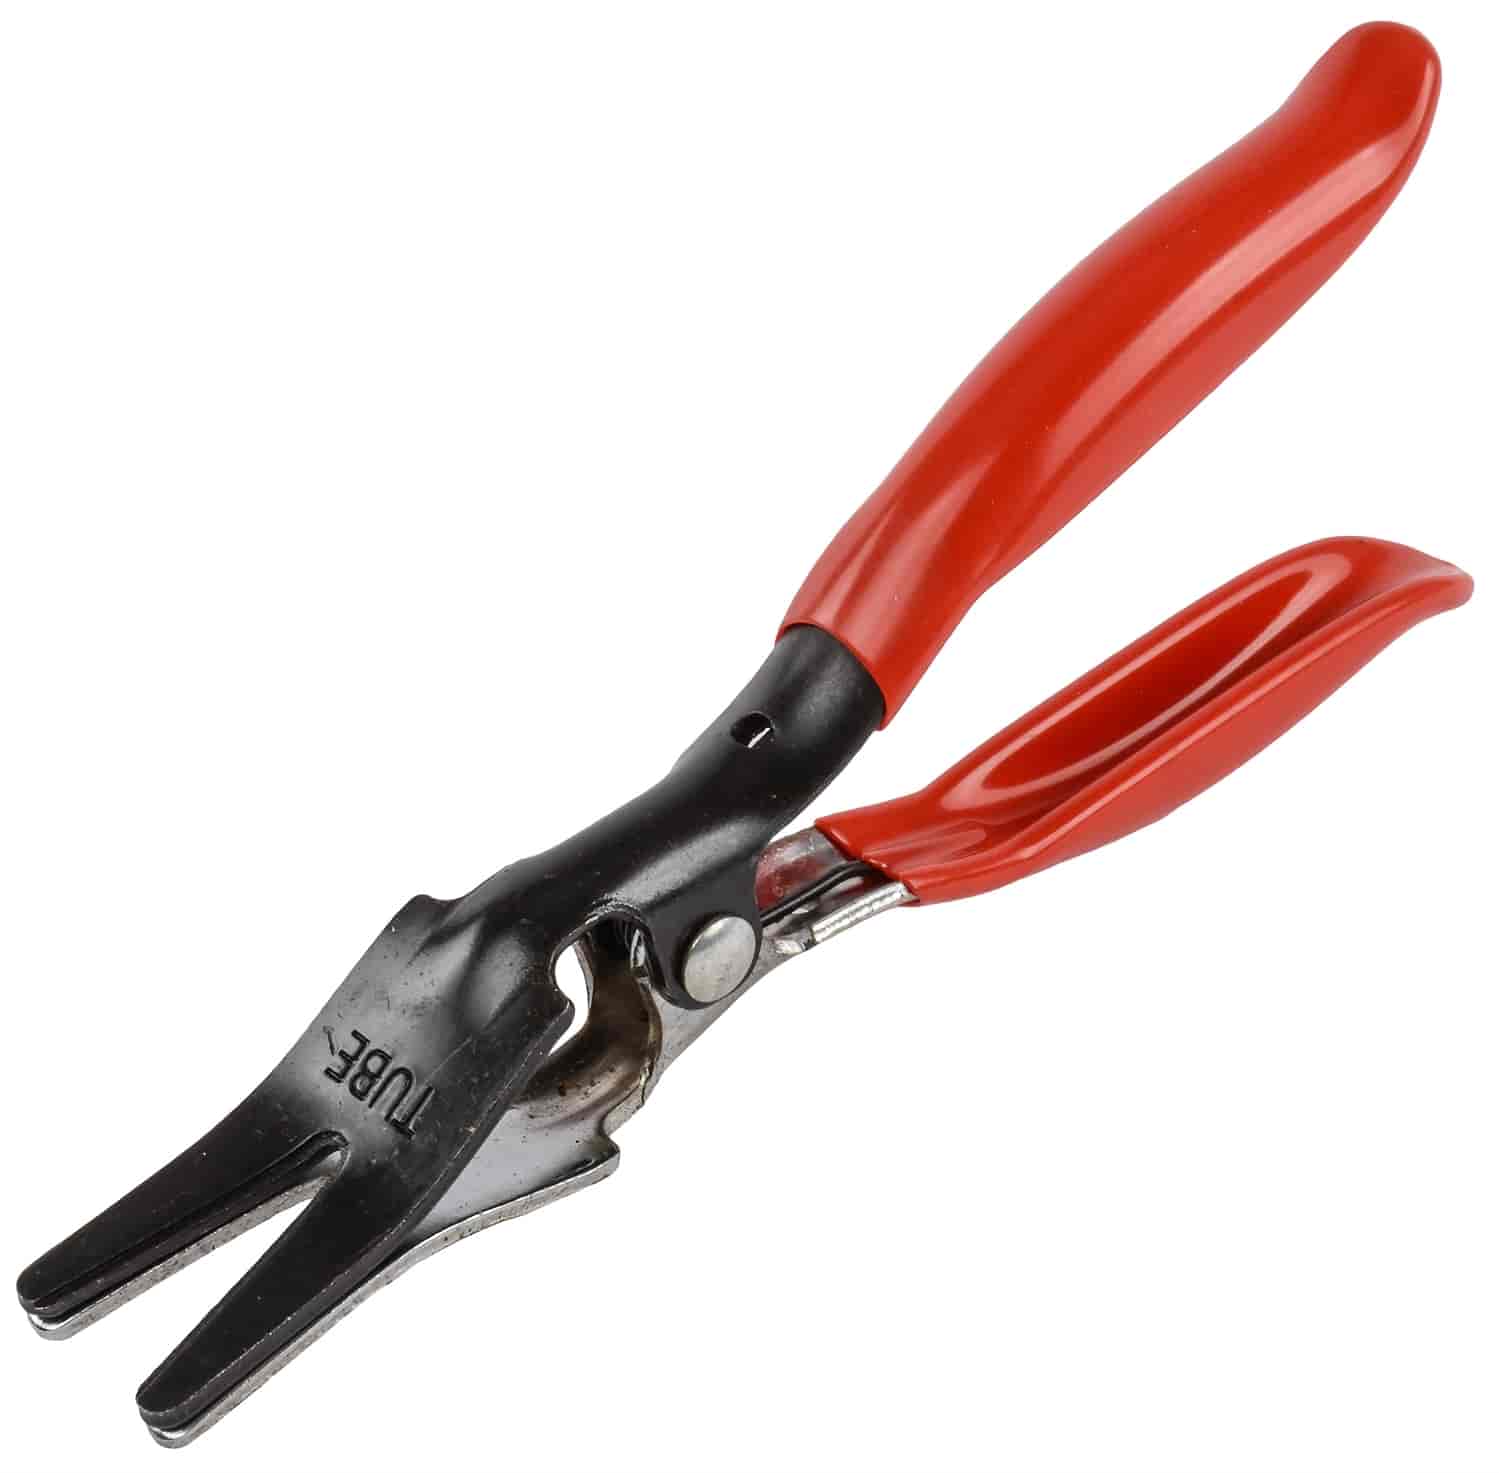 Hose Removal Pliers for 5/32 in. to 1/2